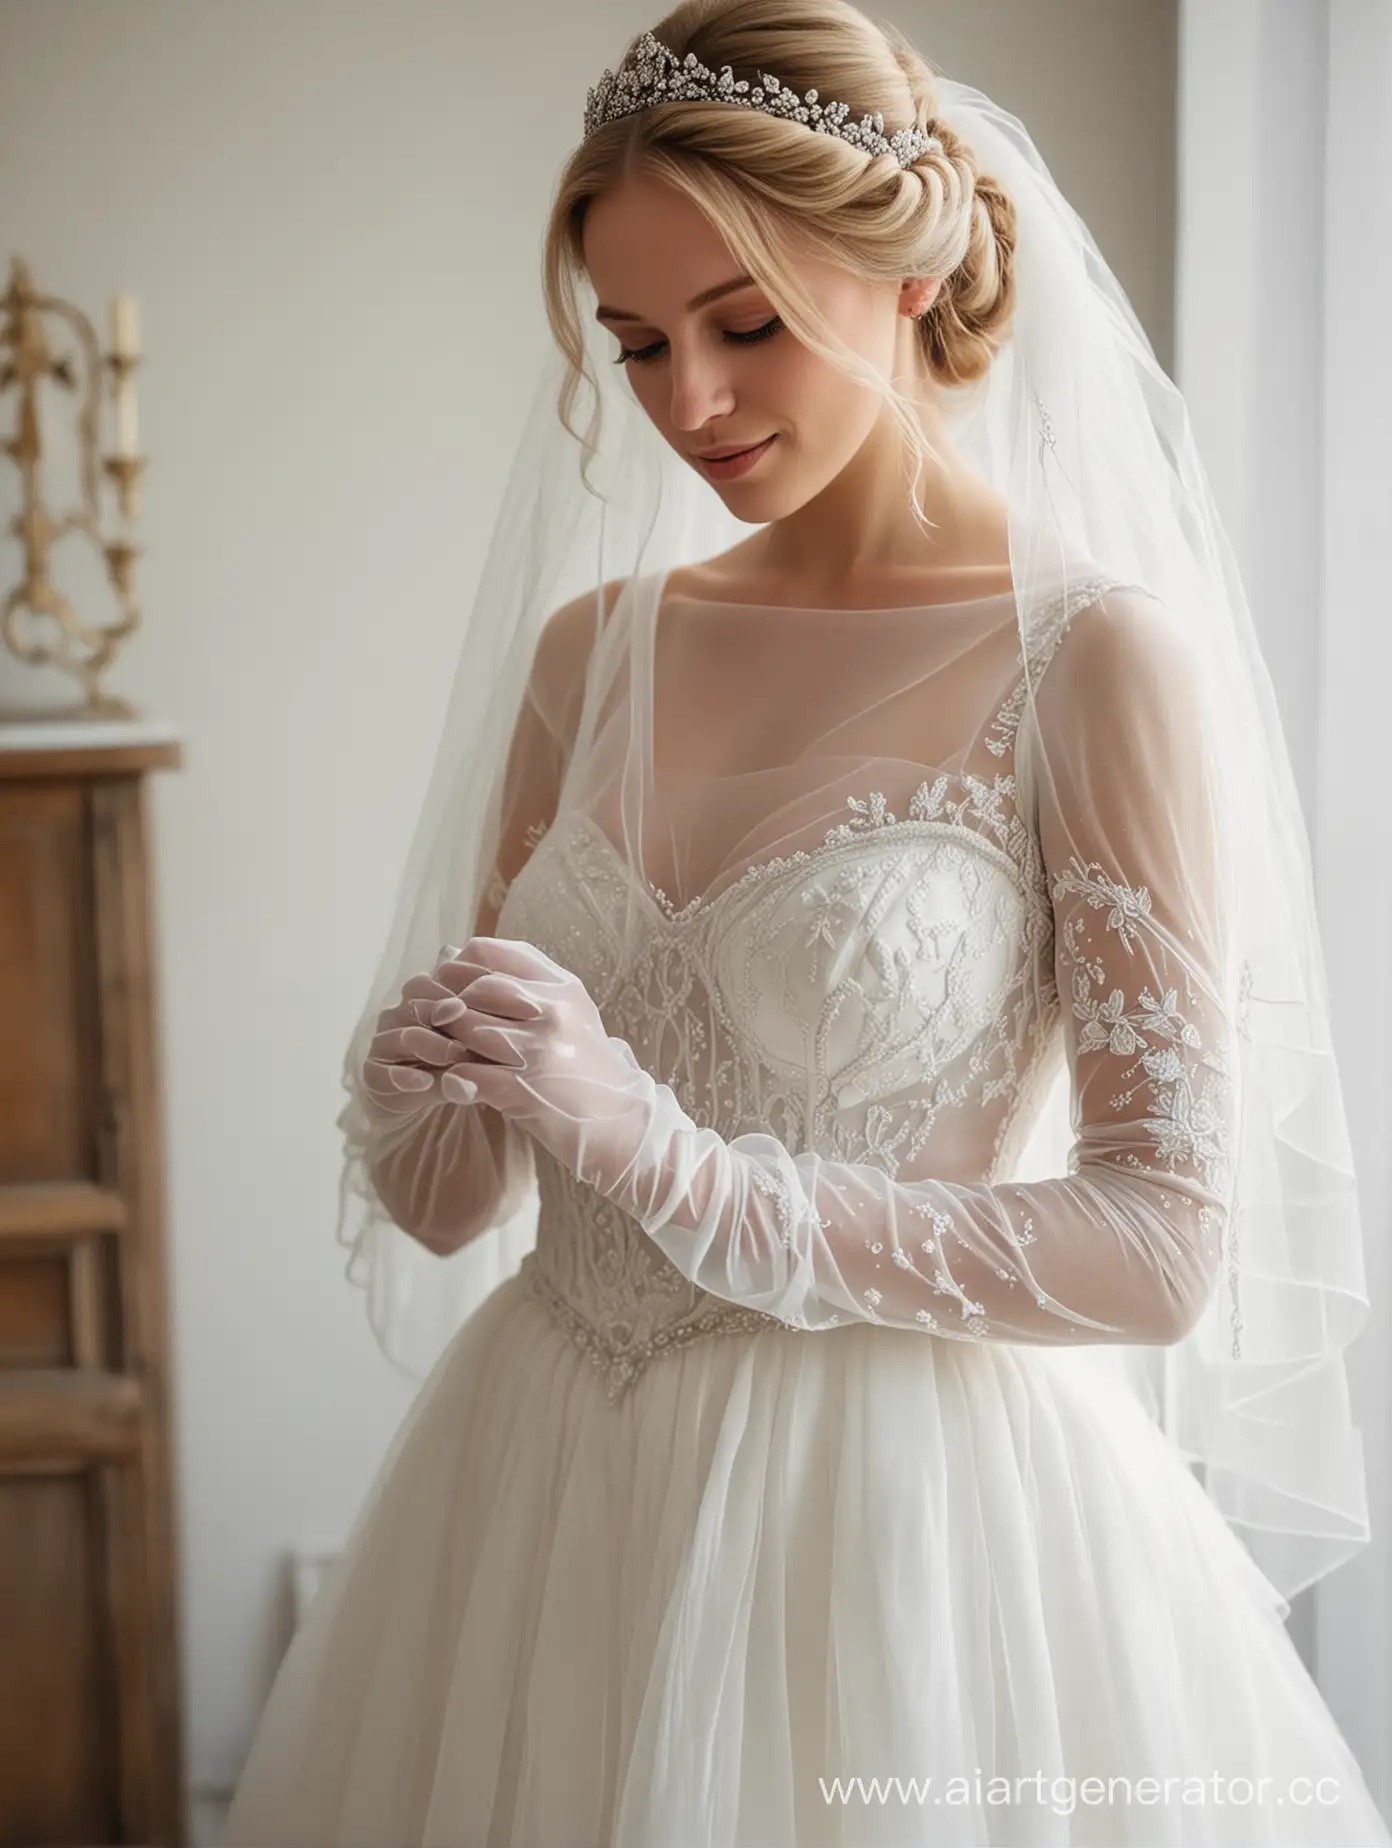 Albino-European-Bride-in-Swirling-Mist-Wedding-Dress-with-French-Braid-Hairstyle-and-Translucent-Gloves